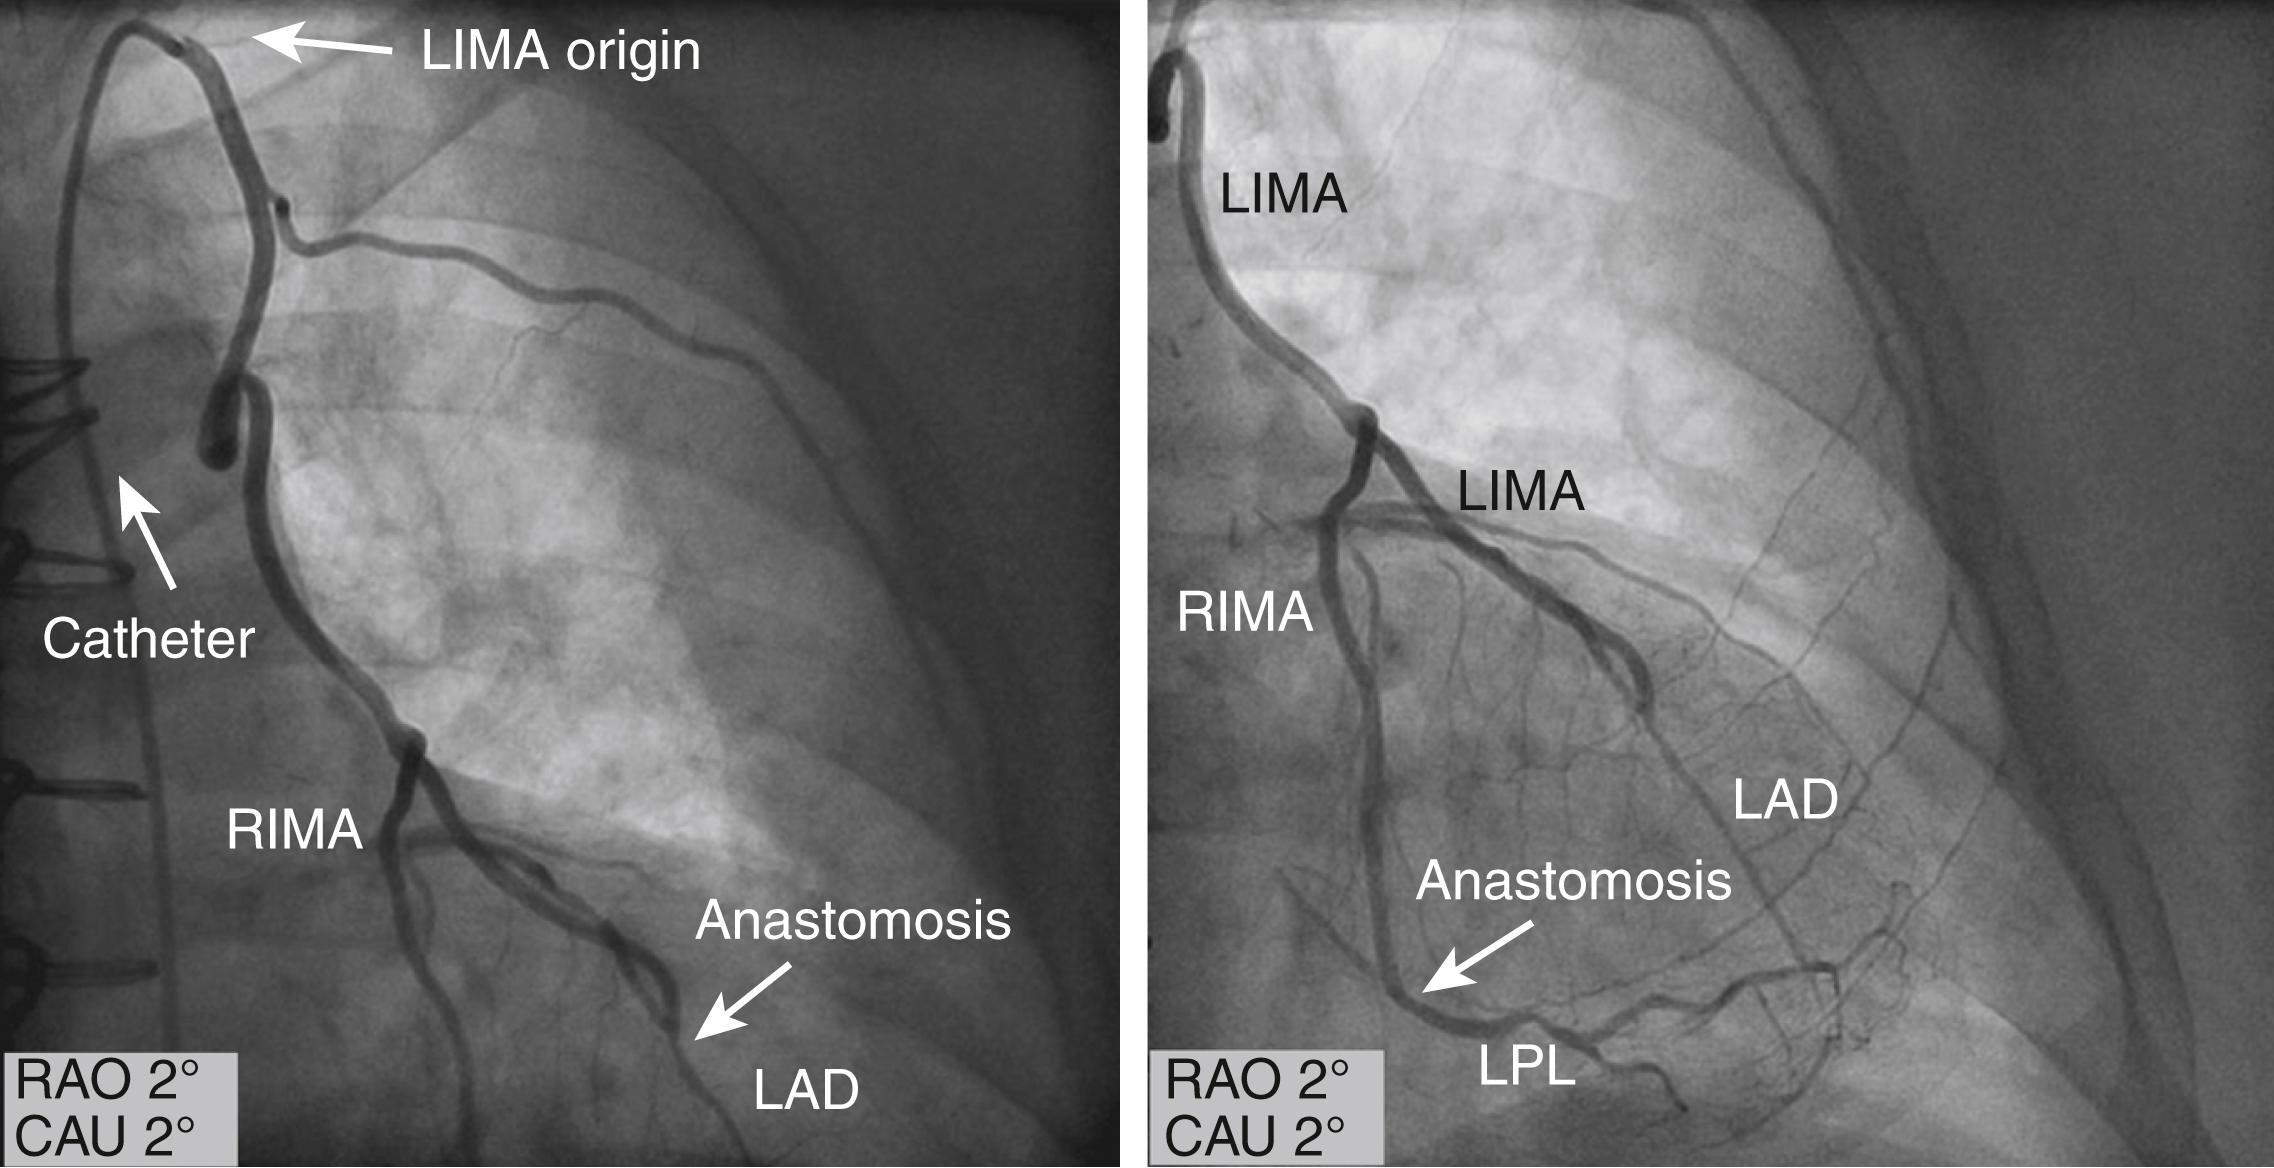 EFIGURE 21.3, Y graft of the left internal mammary artery ( LIMA ) to the left anterior descending artery ( LAD ) and the free right internal mammary artery graft ( RIMA ) to the left posterolateral branch ( LPL ). CAU, Caudal; RAO, right anterior oblique.